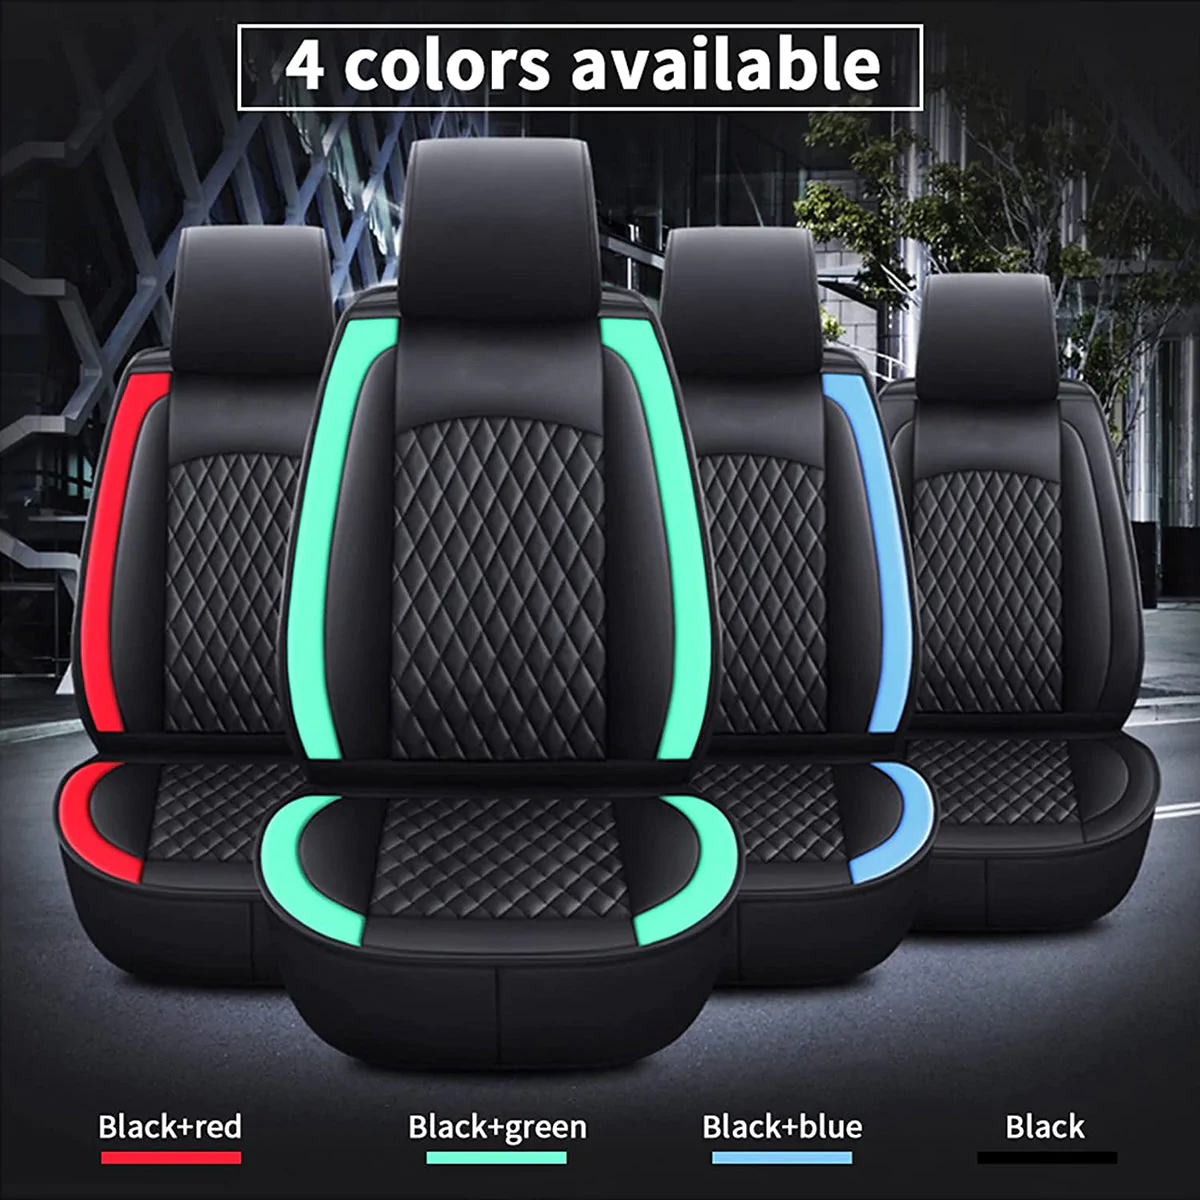 Custom Text For Seat Covers 5 Seats Full Set, Custom Fit For Your Cars, Leatherette Automotive Seat Cushion Protector Universal Fit, Vehicle Auto Interior Decor CA13988